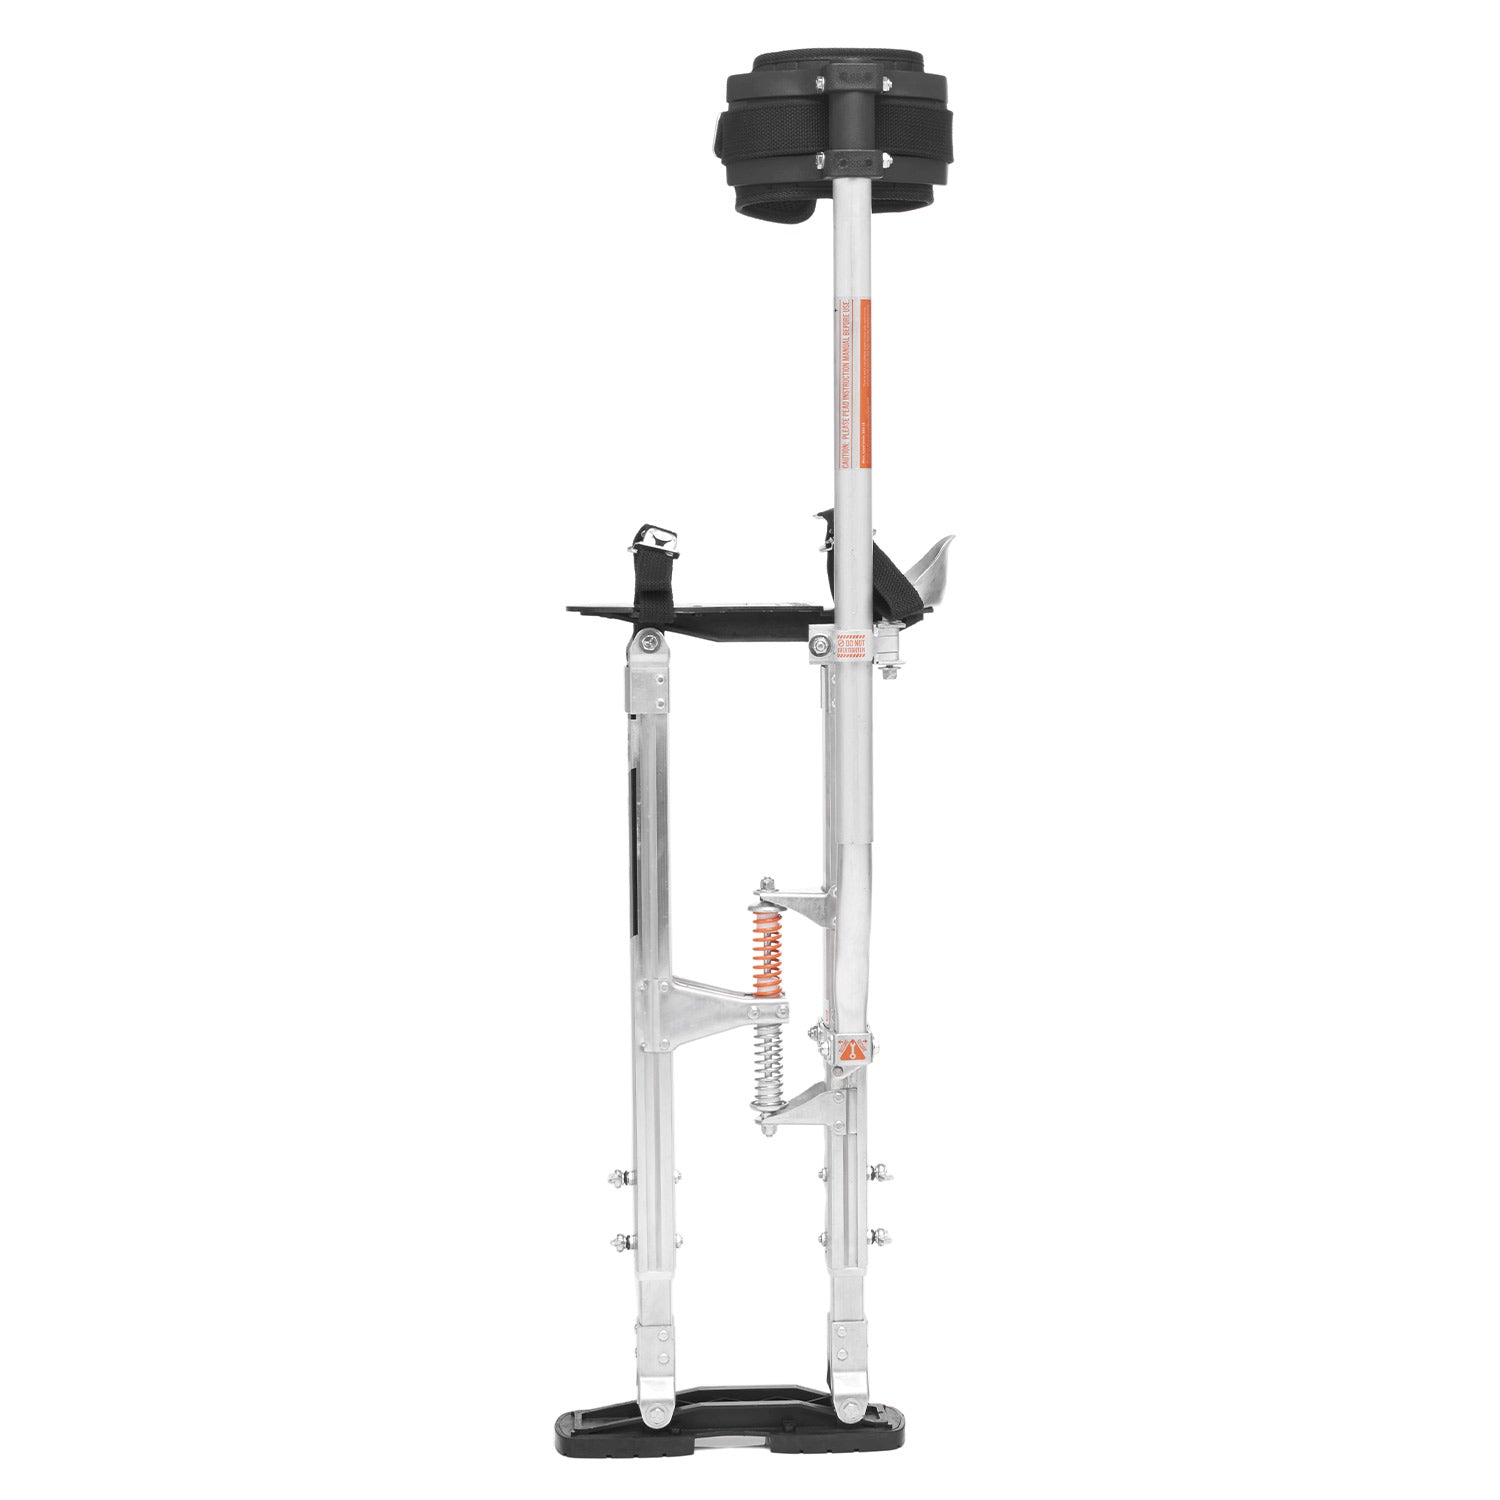 SurPro S1 Aluminum Drywall Stilts outside side view